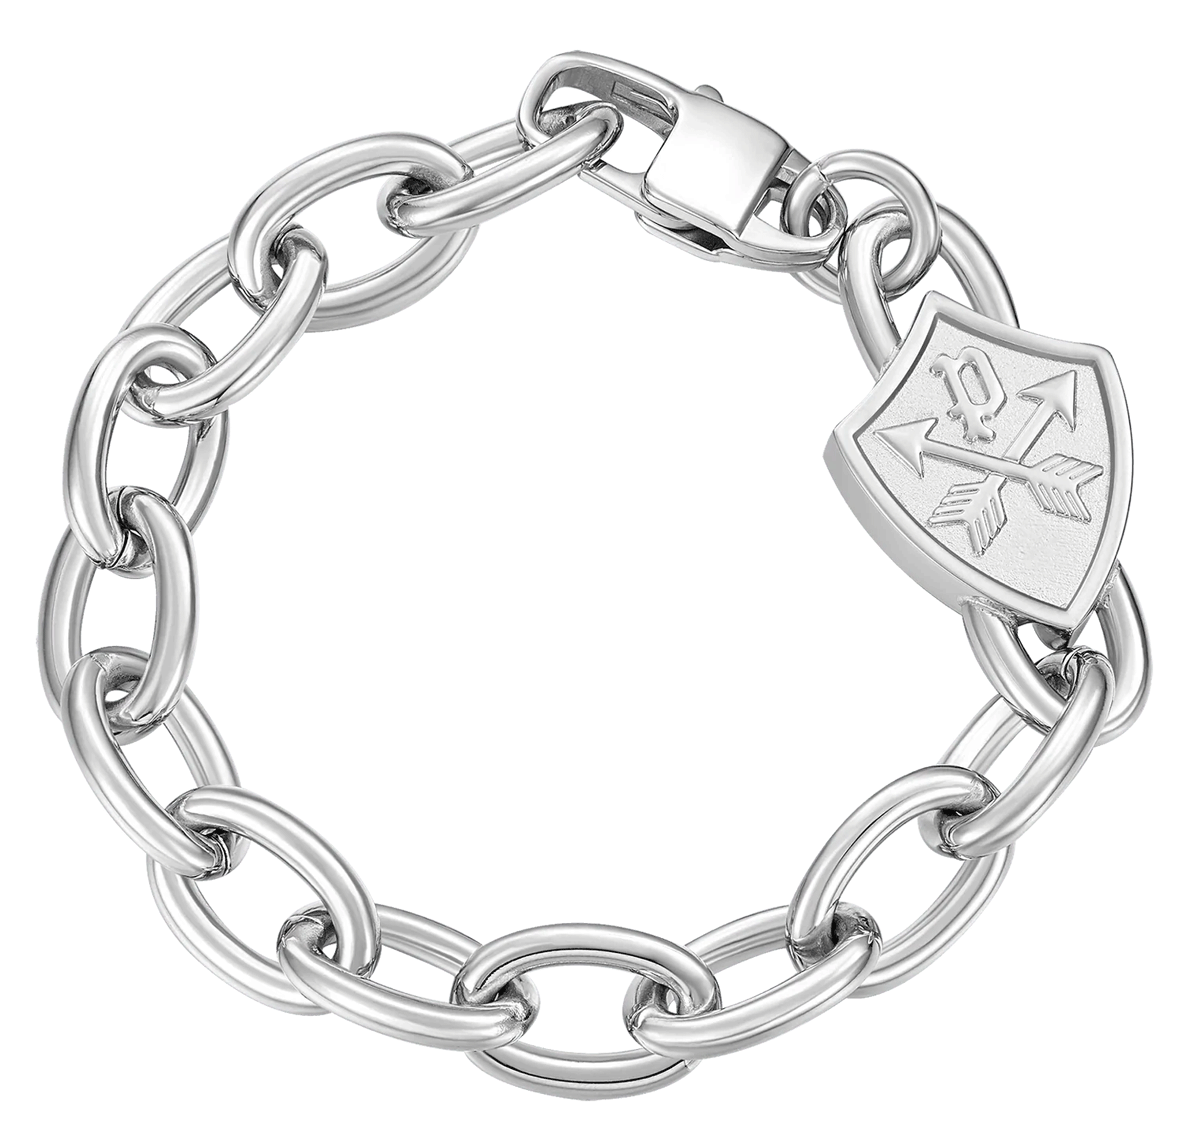 at 61,00 For Police | Heritage € IRISIMO Men Crest Bracelet PEAGB0001617 Starting | By